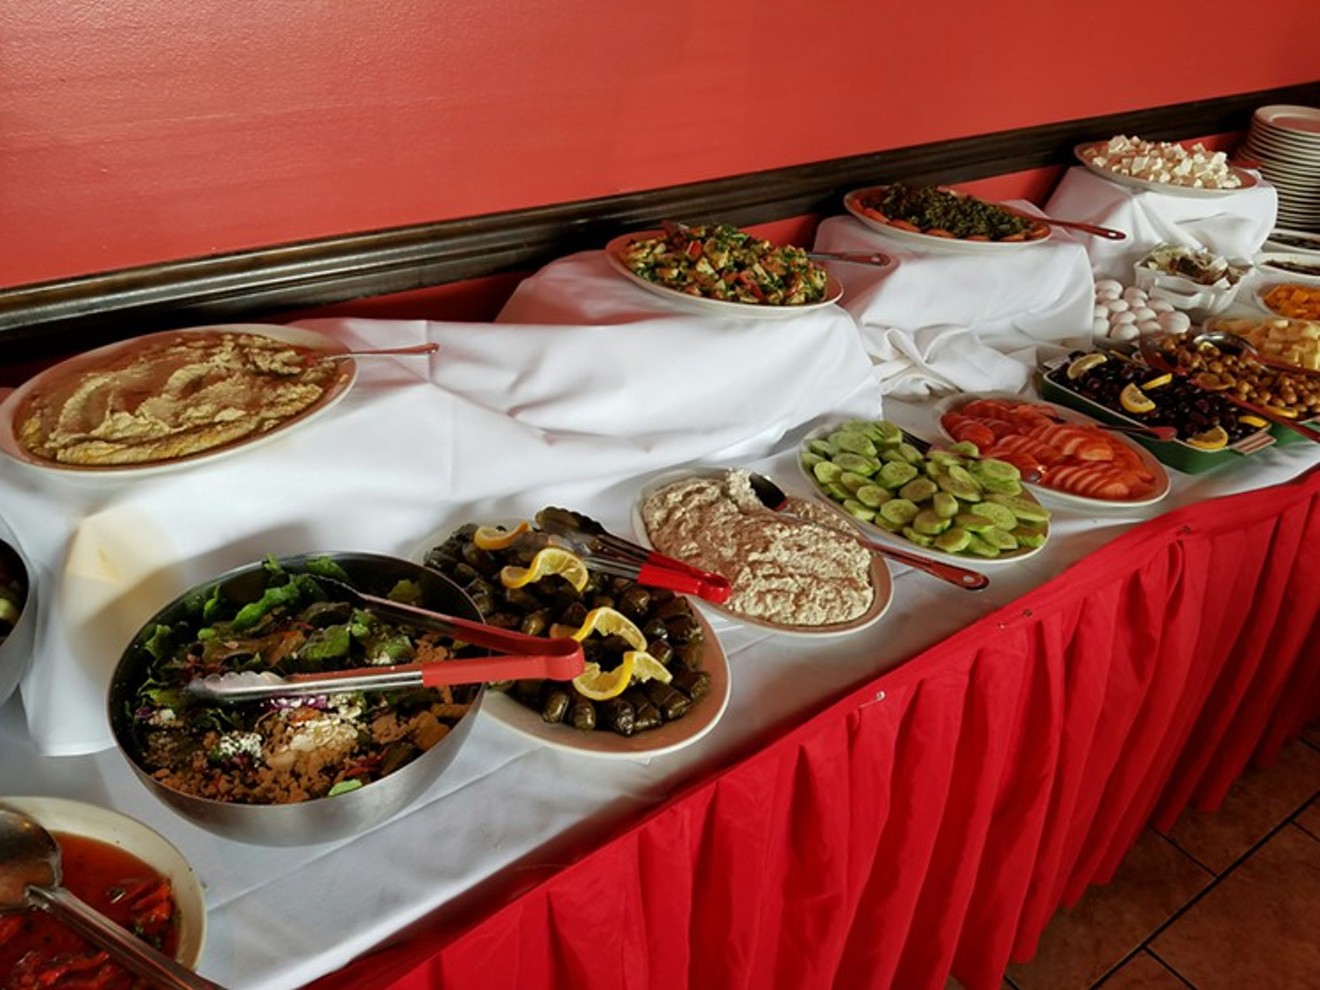 Yeah, Mediterranean food can be healthy, but Pera Turkish Kitchen's massive, over-the-top, delicious brunch buffet could test that theory.